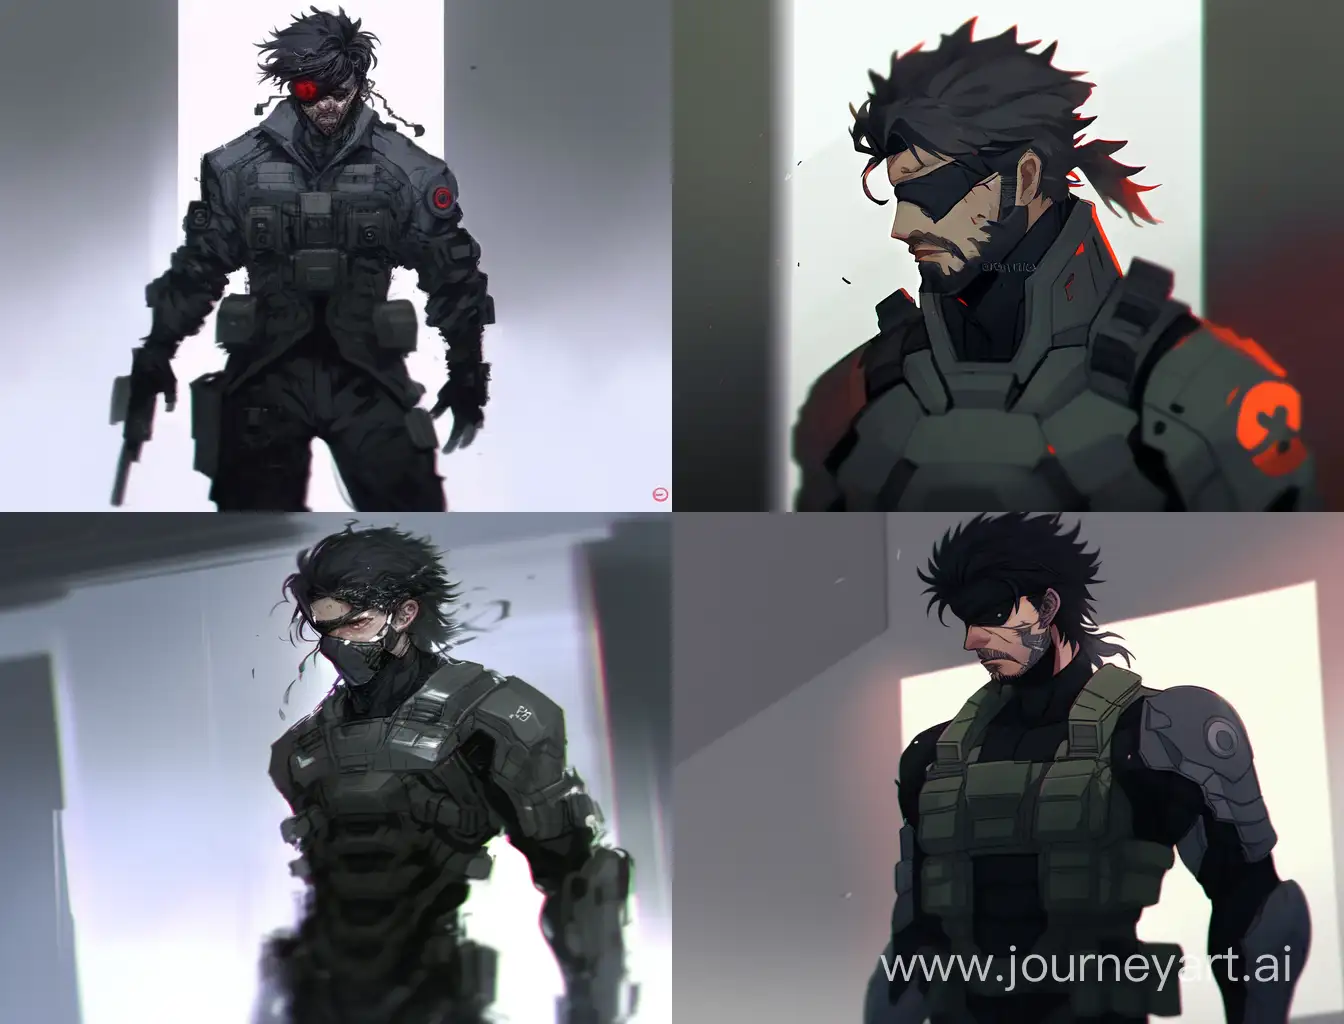 Mysterious-SciFi-Soldier-with-Scar-Metal-Gear-Solid-Concept-Art